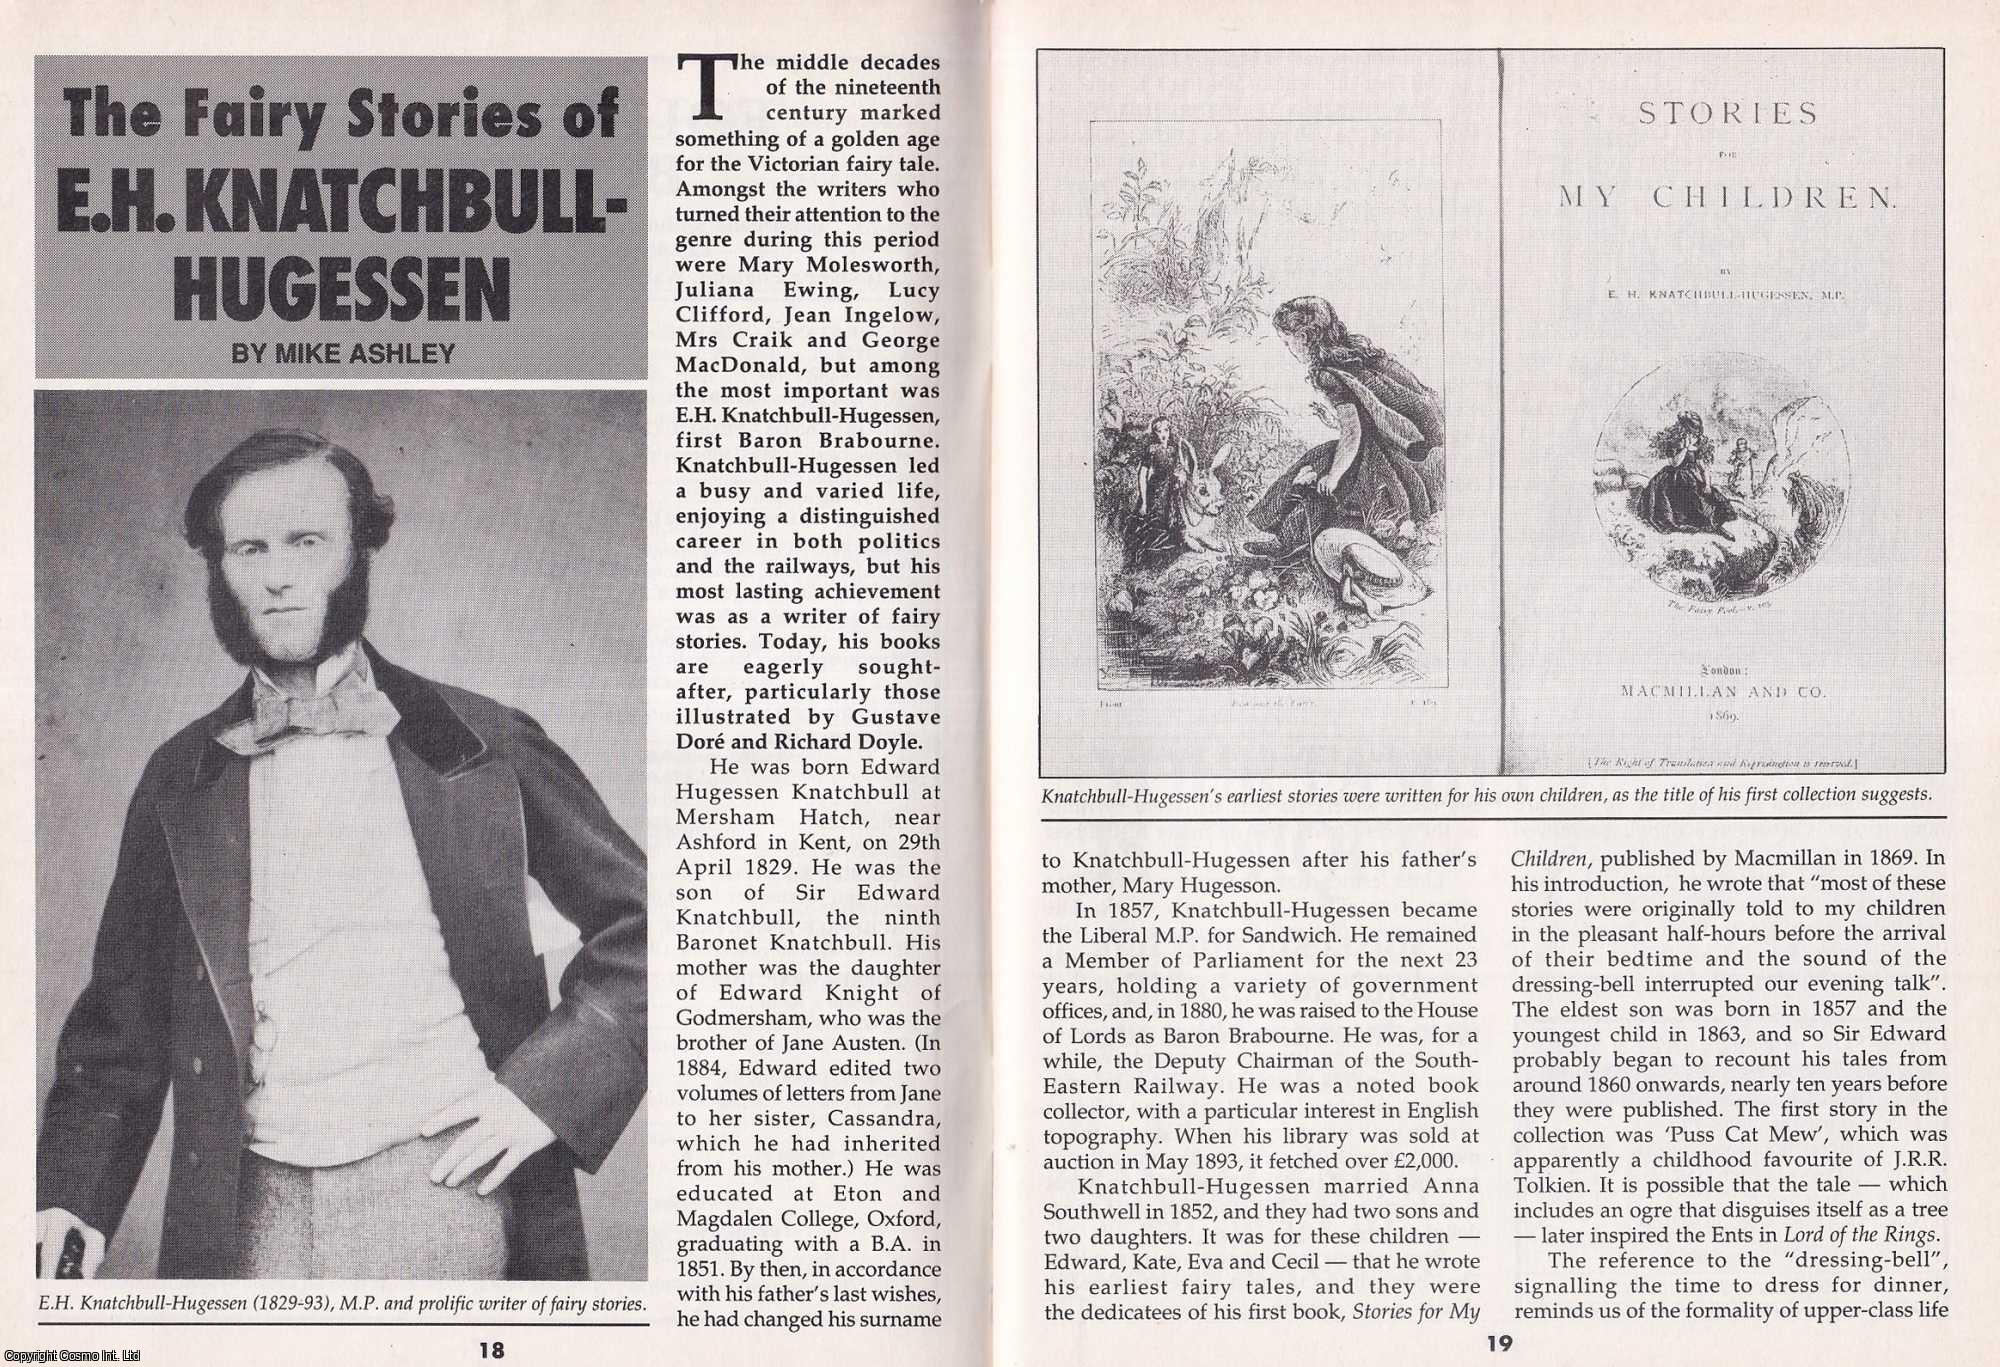 Mike Ashley - The Fairy Stories of E. H. Knatchbull-Hugessen. This is an original article separated from an issue of The Book & Magazine Collector publication.